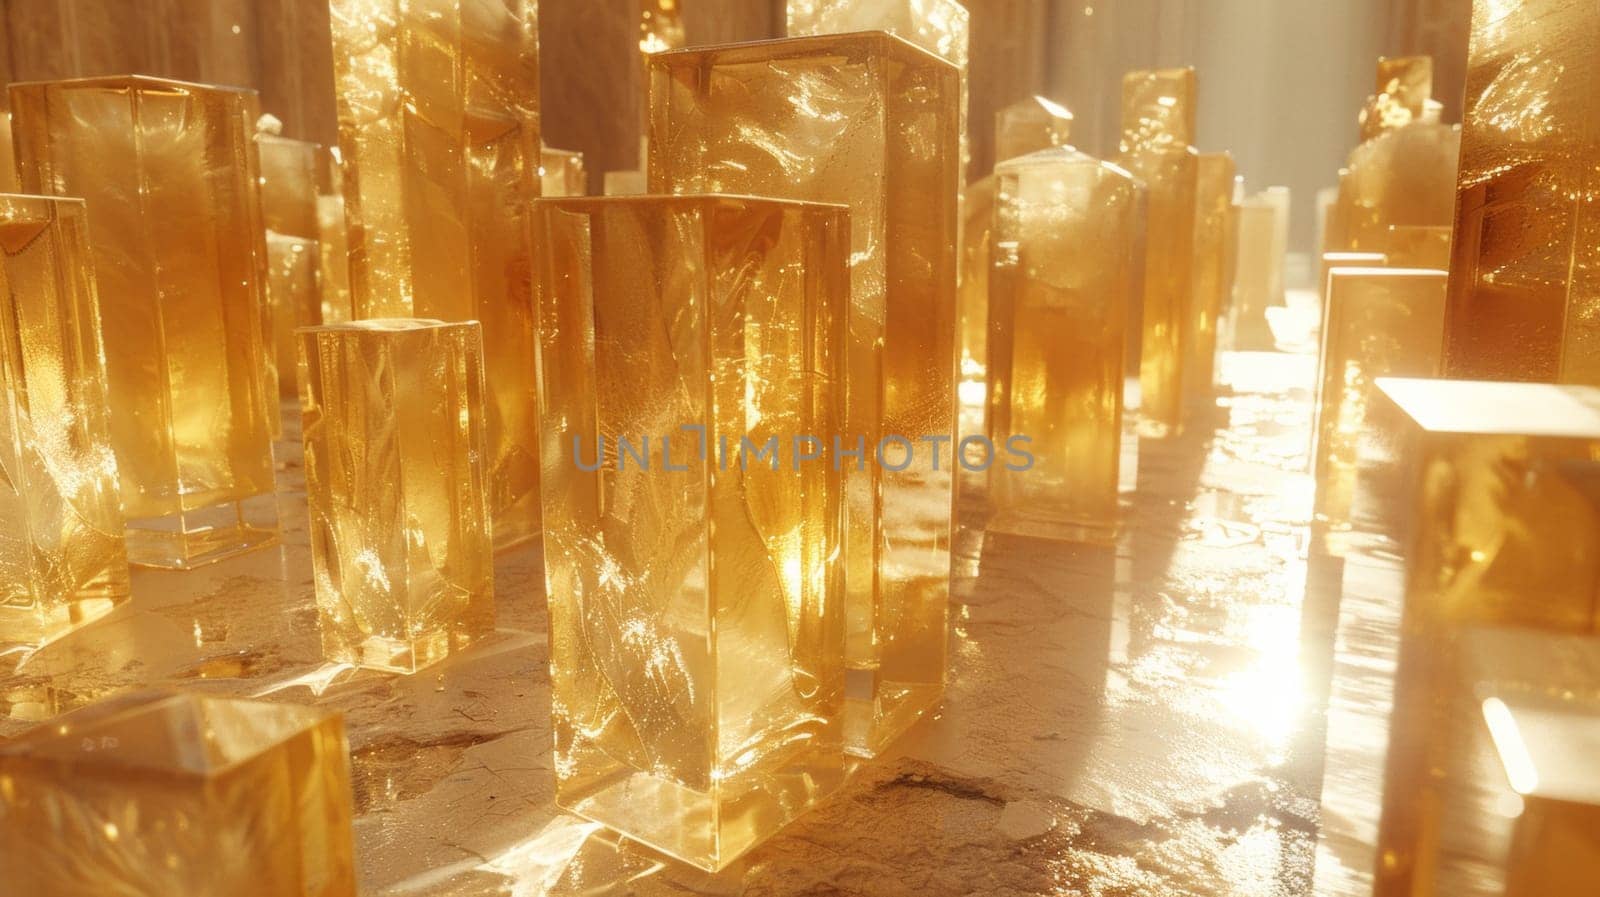 A bunch of golden blocks are sitting on a table